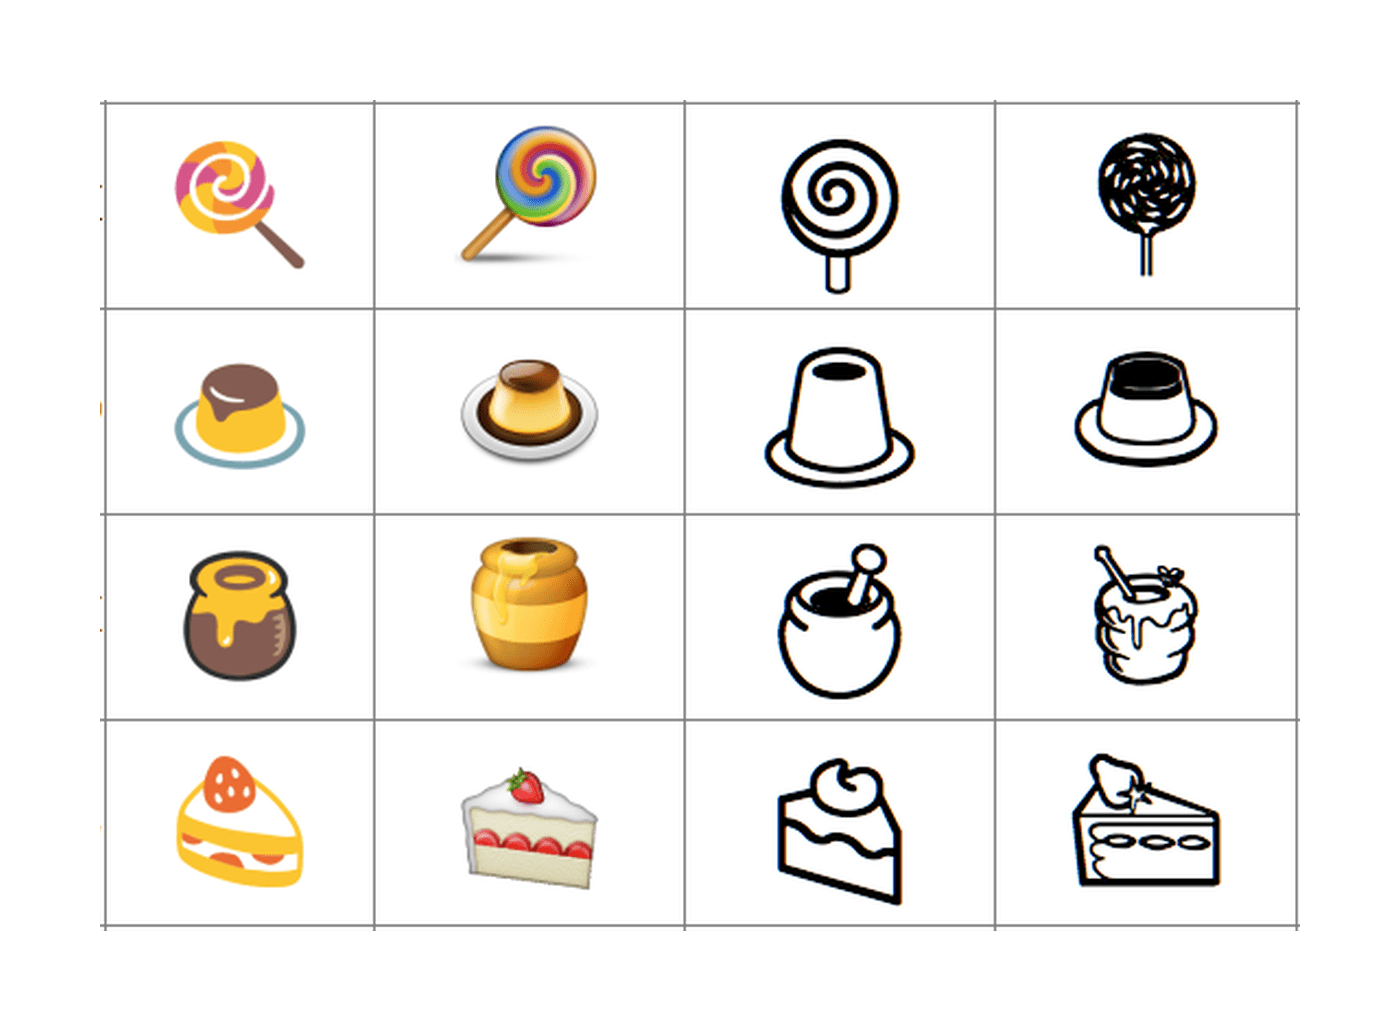  A set of 16 different emojis 